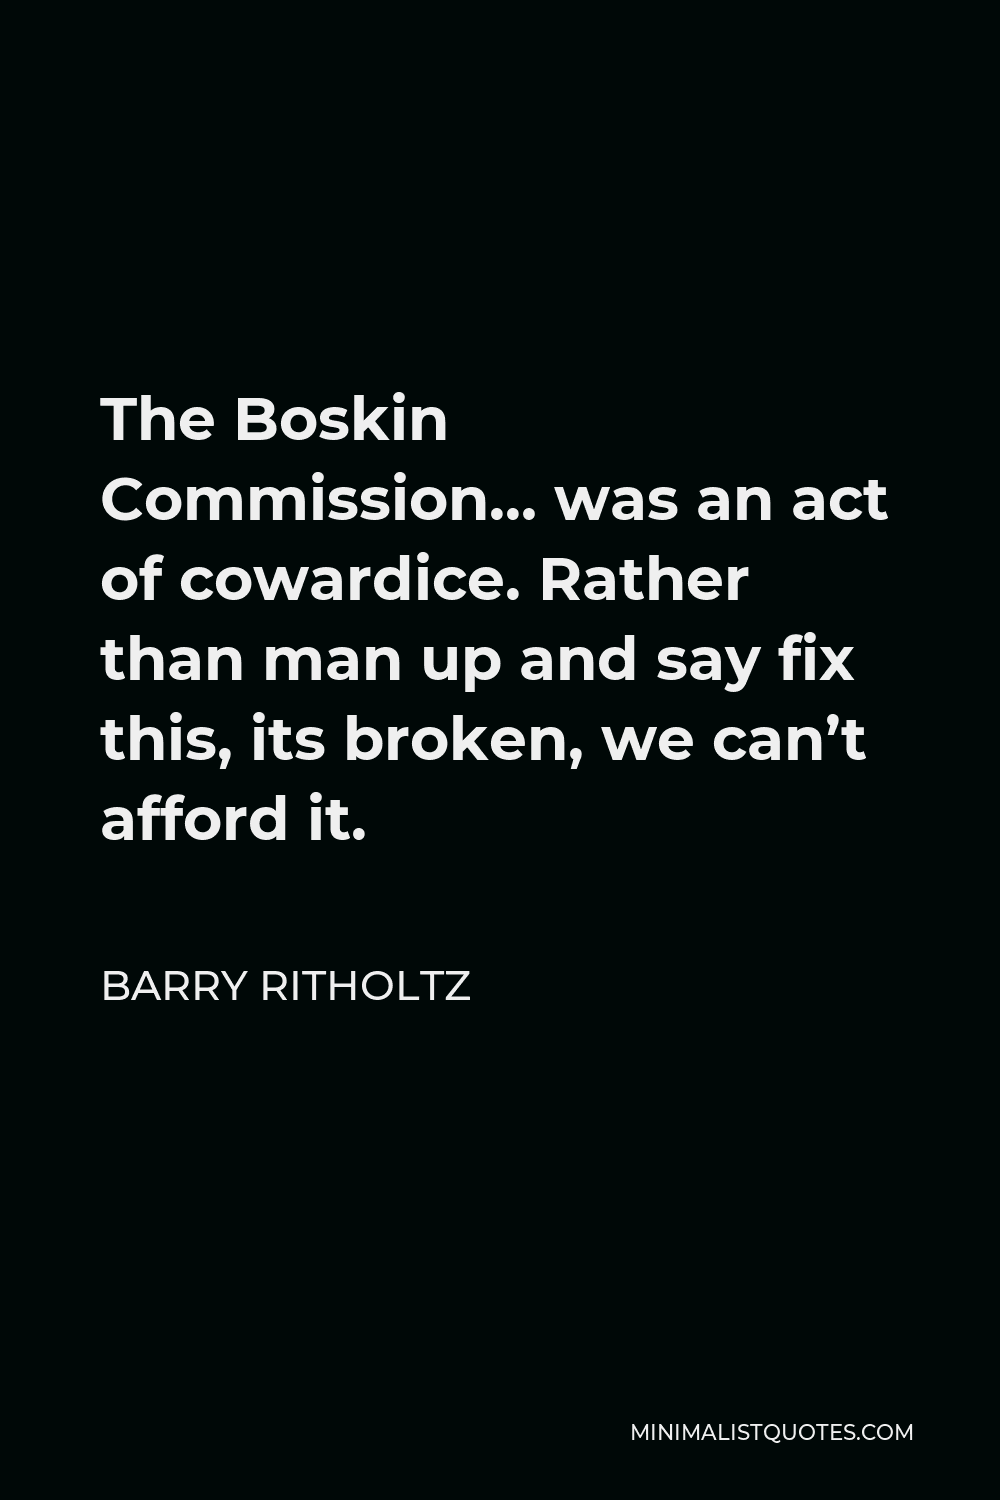 Barry Ritholtz Quote - The Boskin Commission… was an act of cowardice. Rather than man up and say fix this, its broken, we can’t afford it.